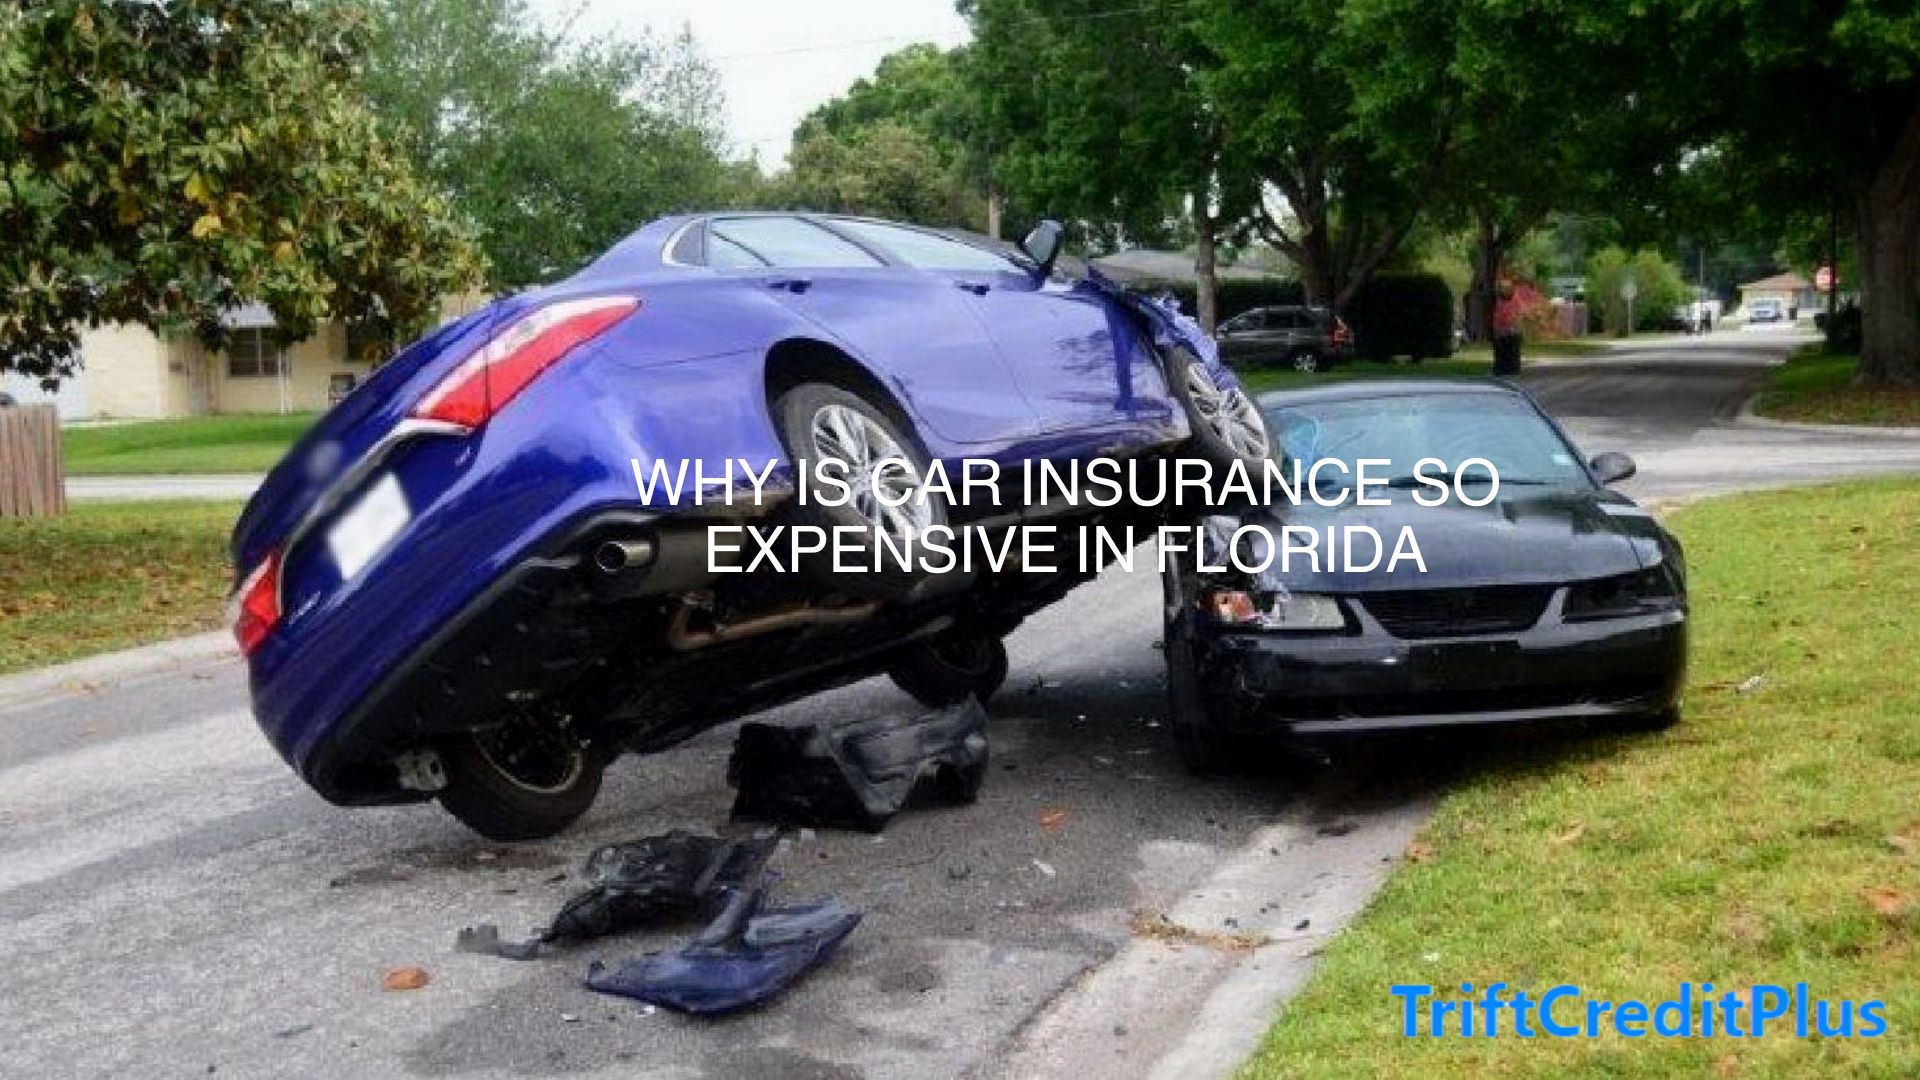 Why Is Car Insurance So Expensive in Florida